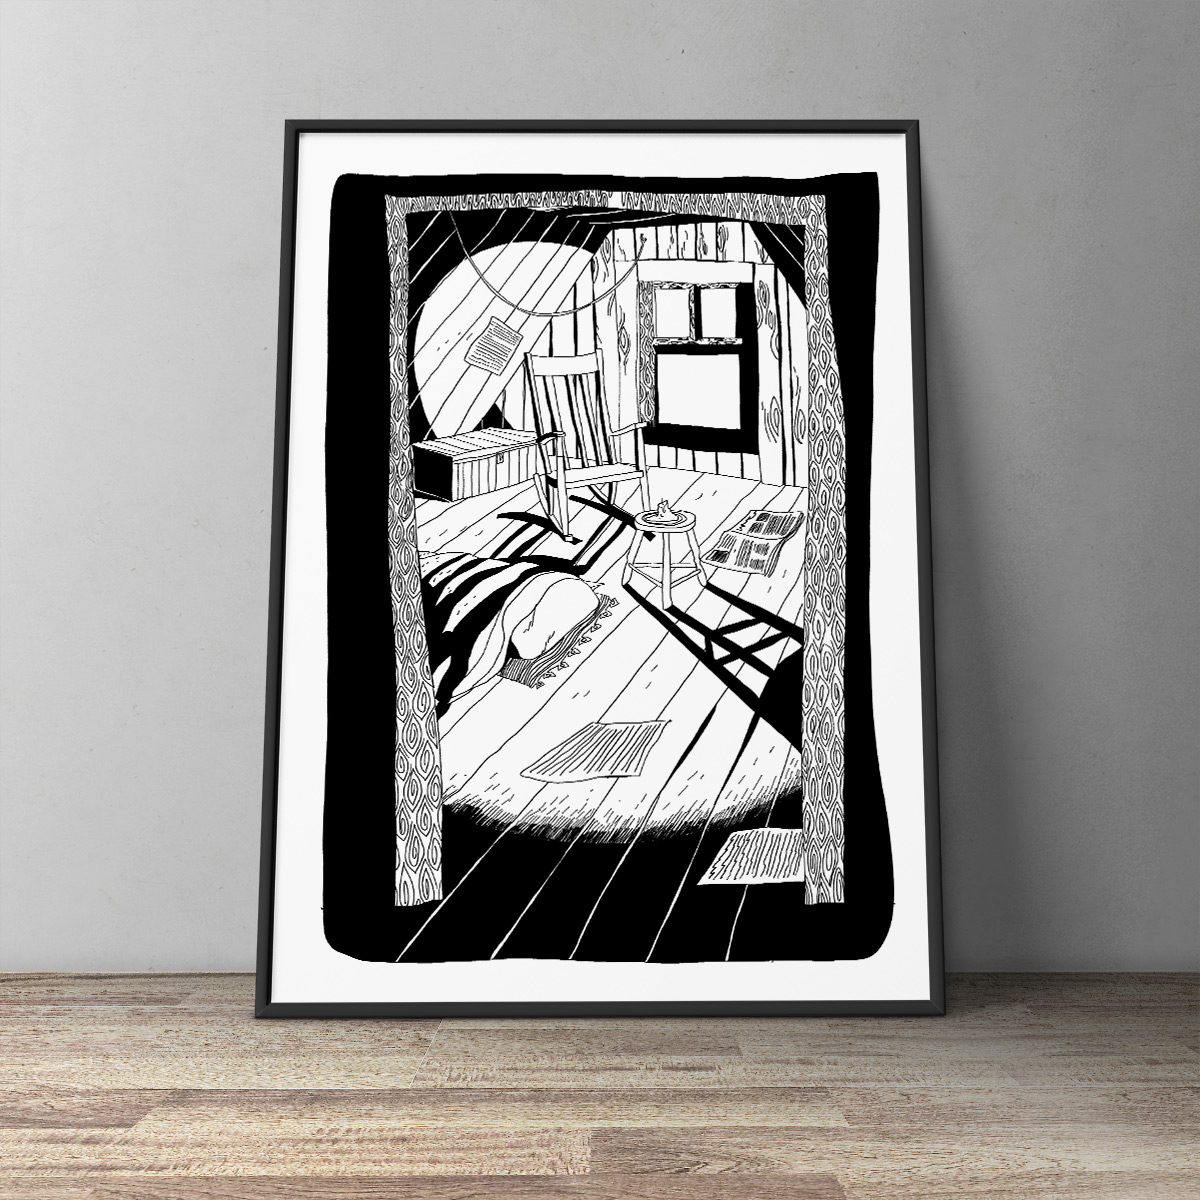 art-prints, gliceé, figurative, graphical, illustrative, monochrome, architecture, everyday life, black, white, ink, paper, black-and-white, contemporary-art, copenhagen, danish, decorative, design, interior, interior-design, modern, modern-art, nordic, scandinavien, time, Buy original high quality art. Paintings, drawings, limited edition prints & posters by talented artists.